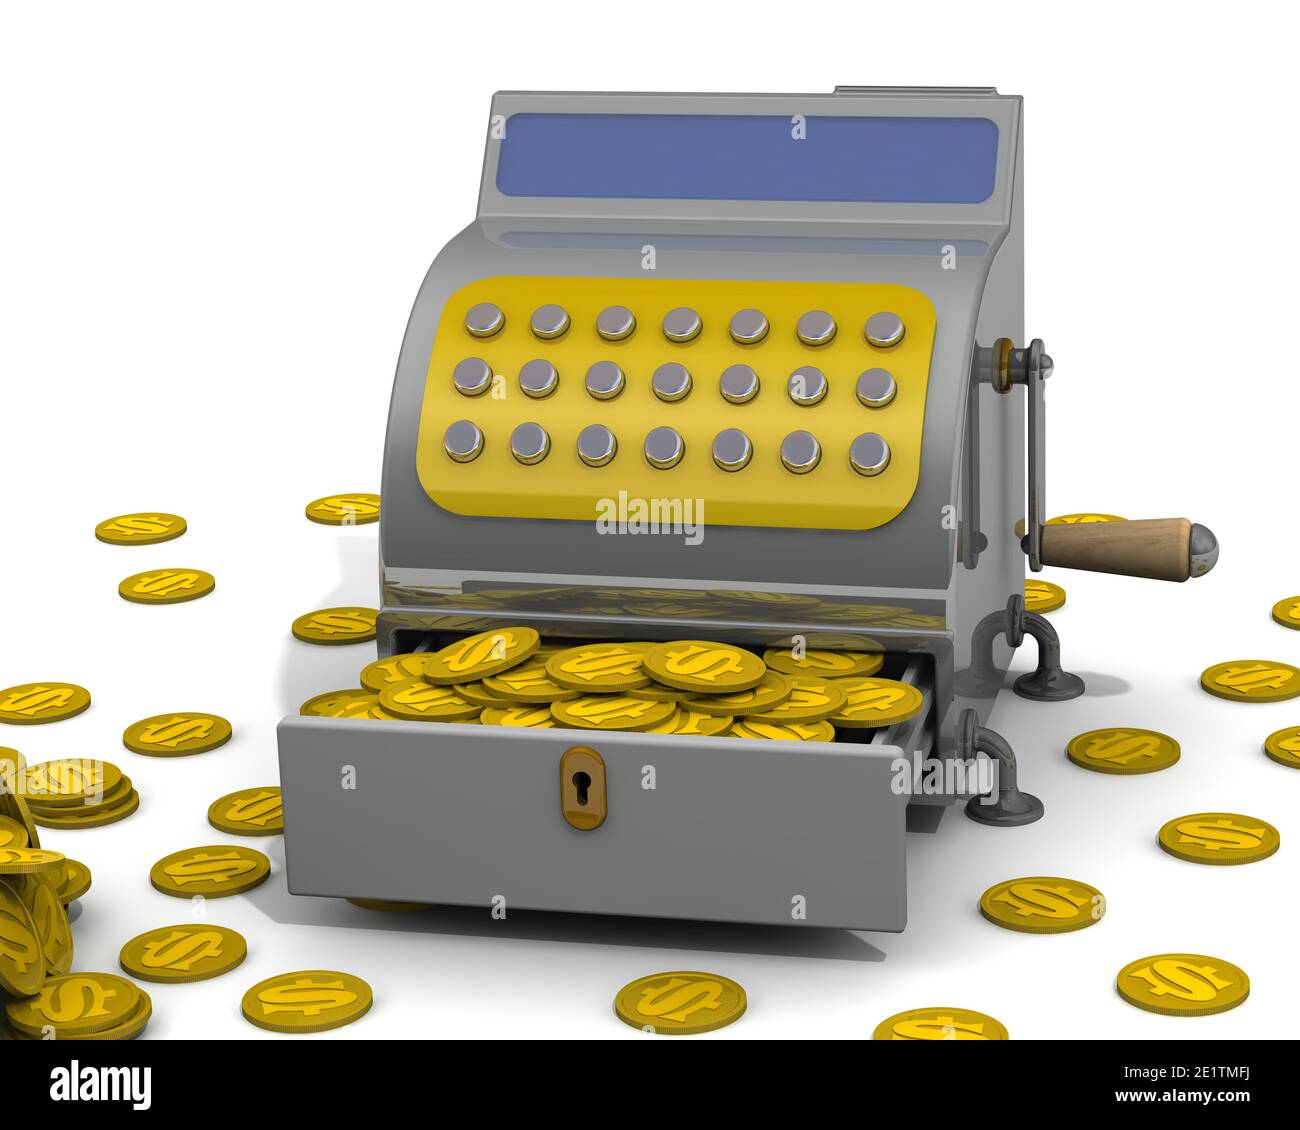 Open cash register filled with the USA coins and a lot of coins on a white surface. The concept of financial success. 3D Illustration Stock Photo